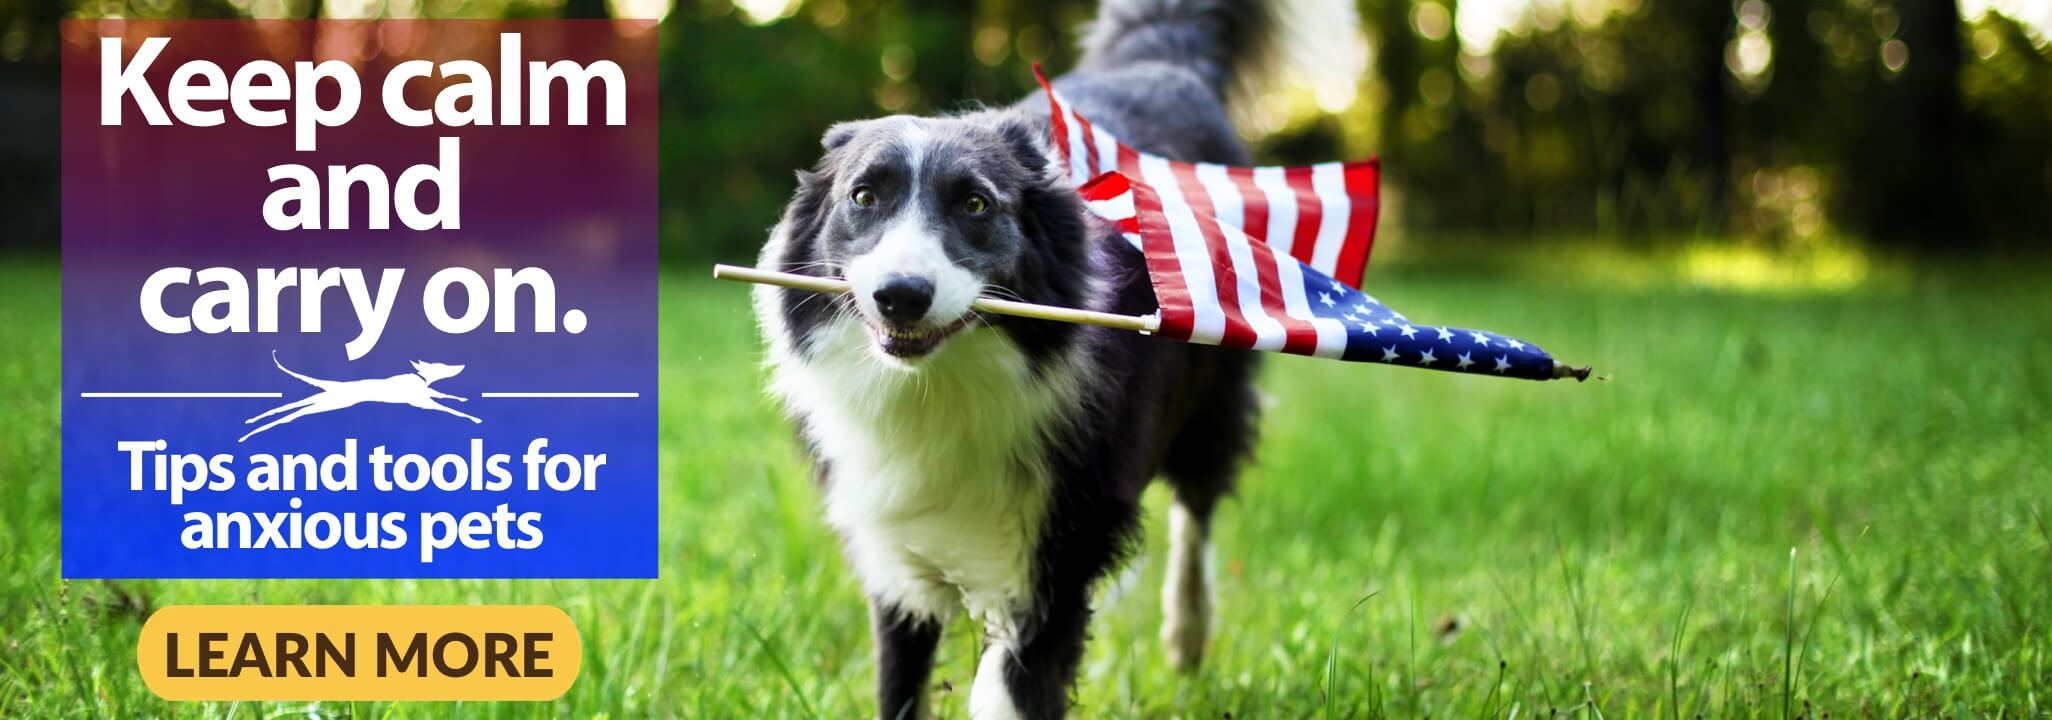 Border Collie carrying American flag and walking towards camera in a grassy field. Keep calm and carry on. Tips and tools for anxious pets. Learn More